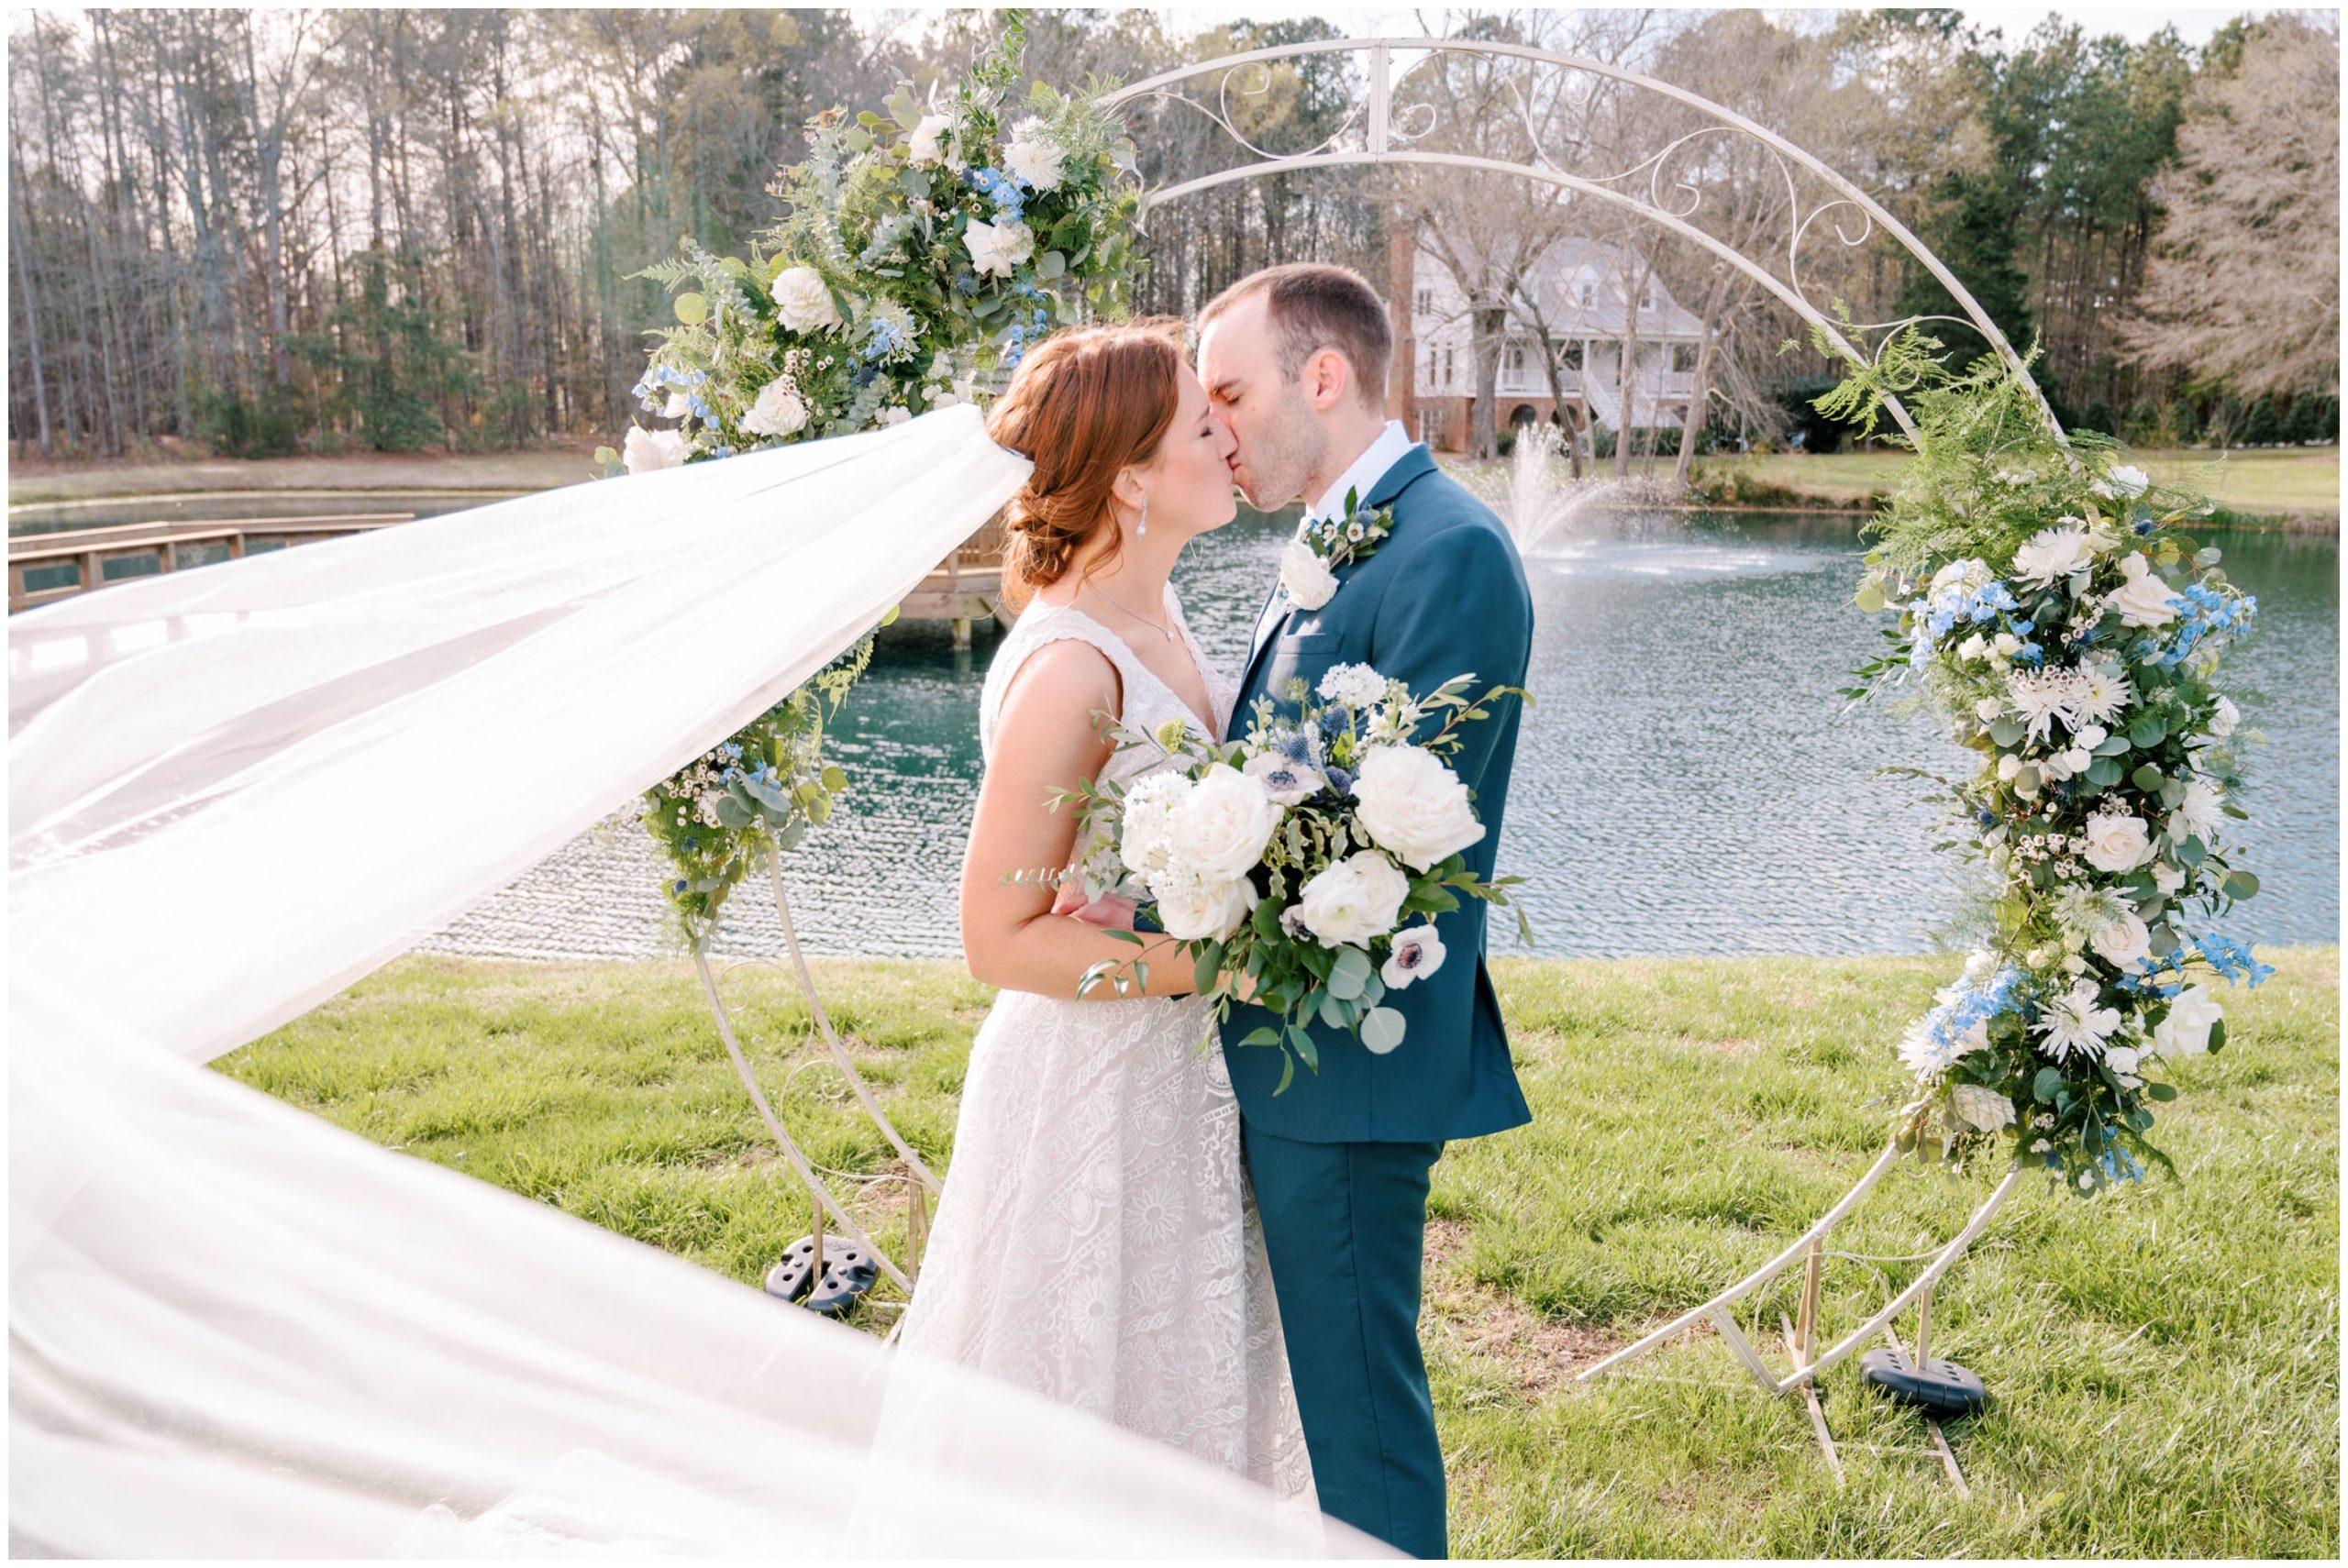 Outdoor spring wedding ceremony in the pavilion gardens at Walnut Hill